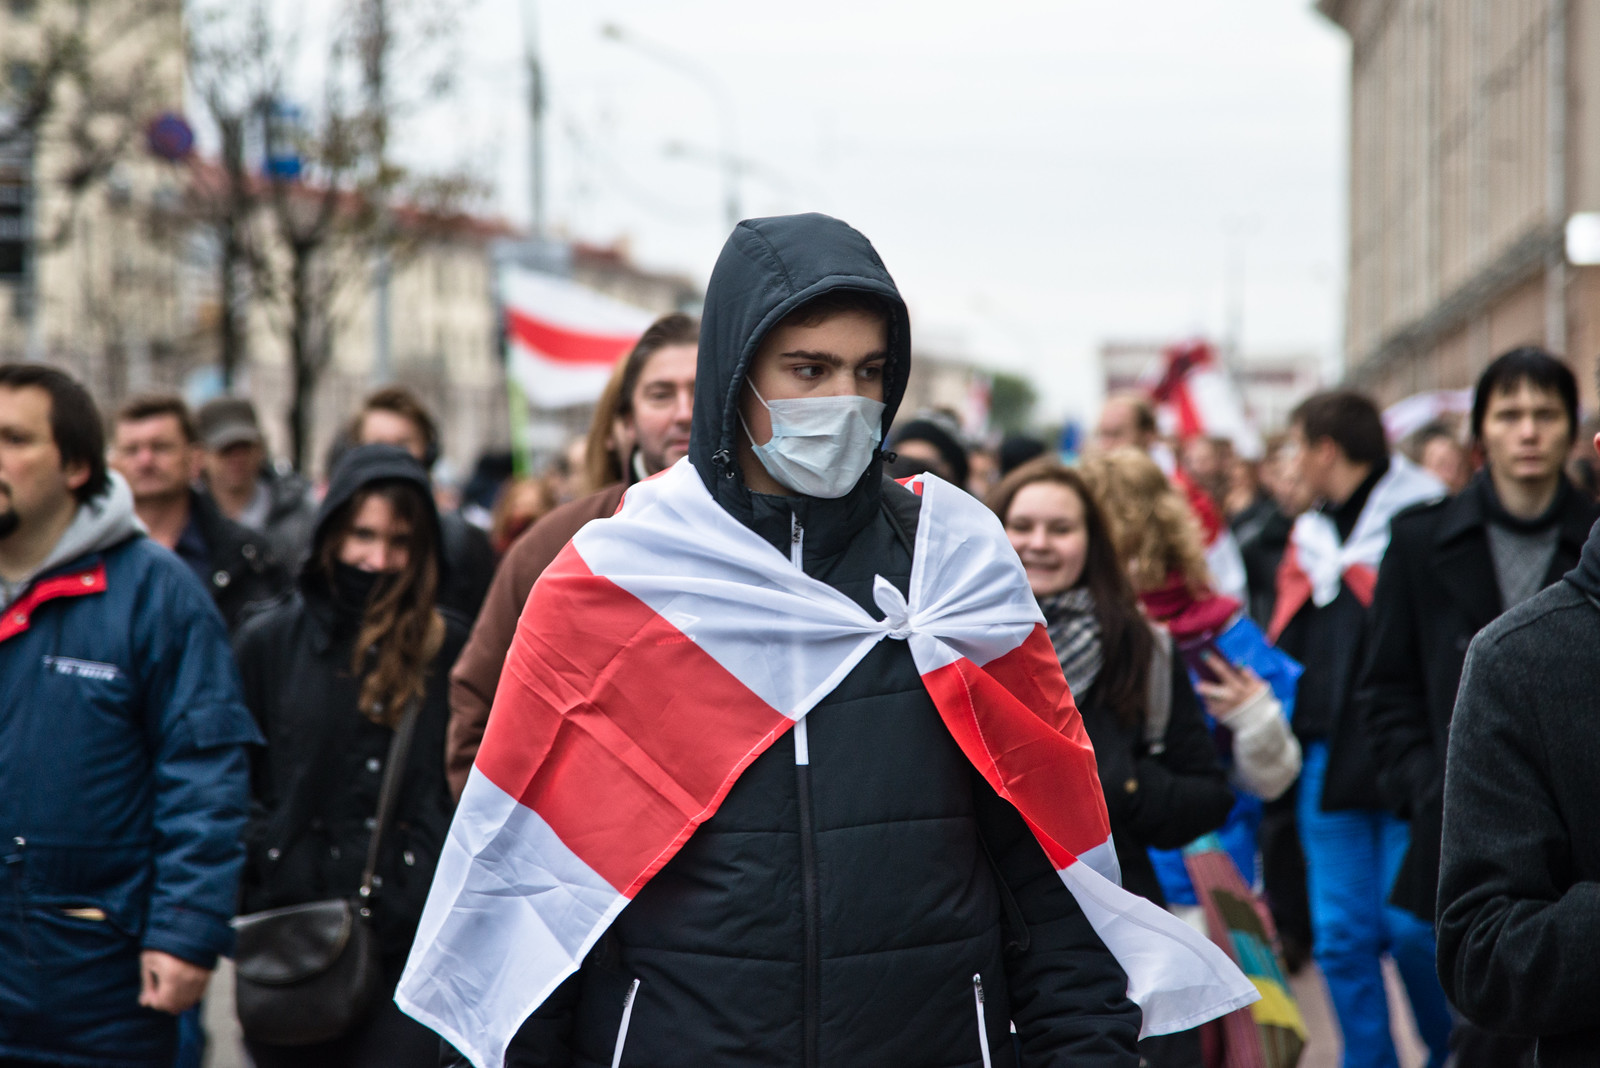 "March of the national flag", 10th October 2015 in Minsk